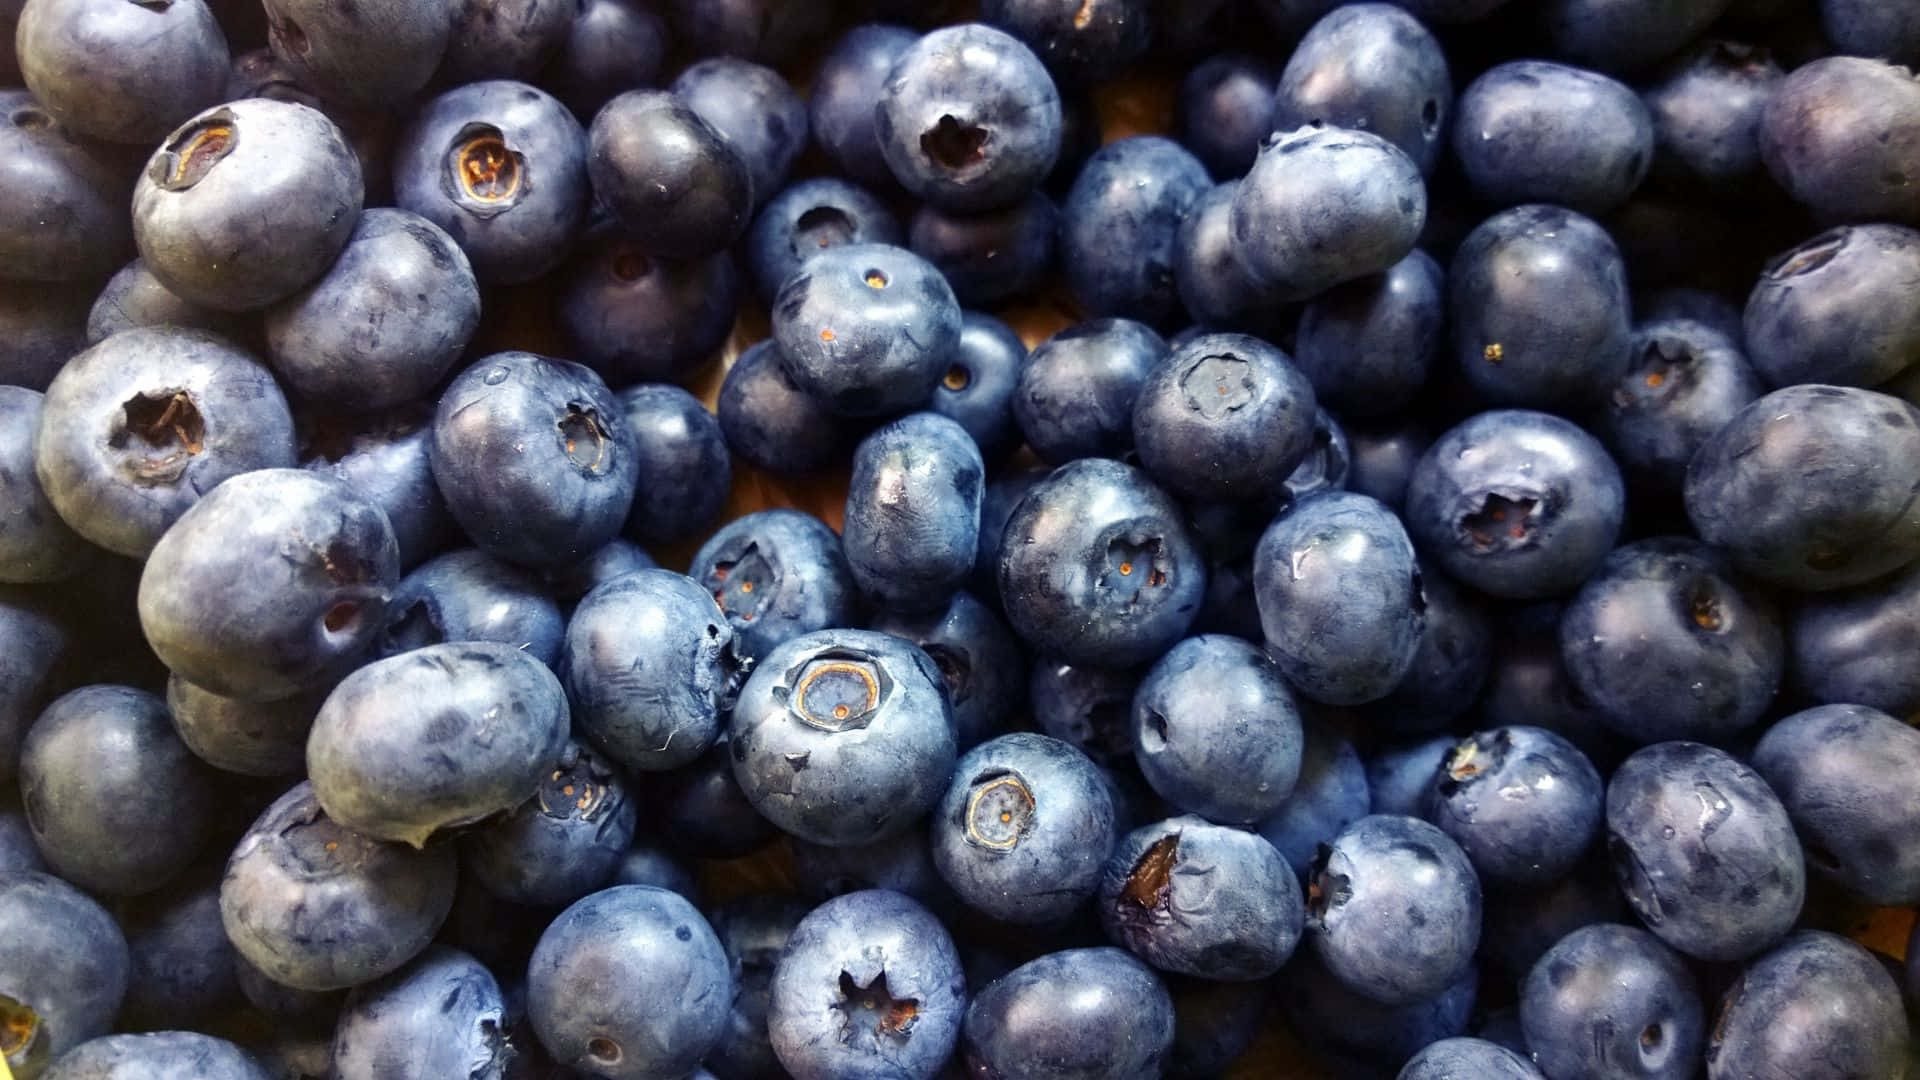 Fresh Blueberries Picked Straight From the Bush